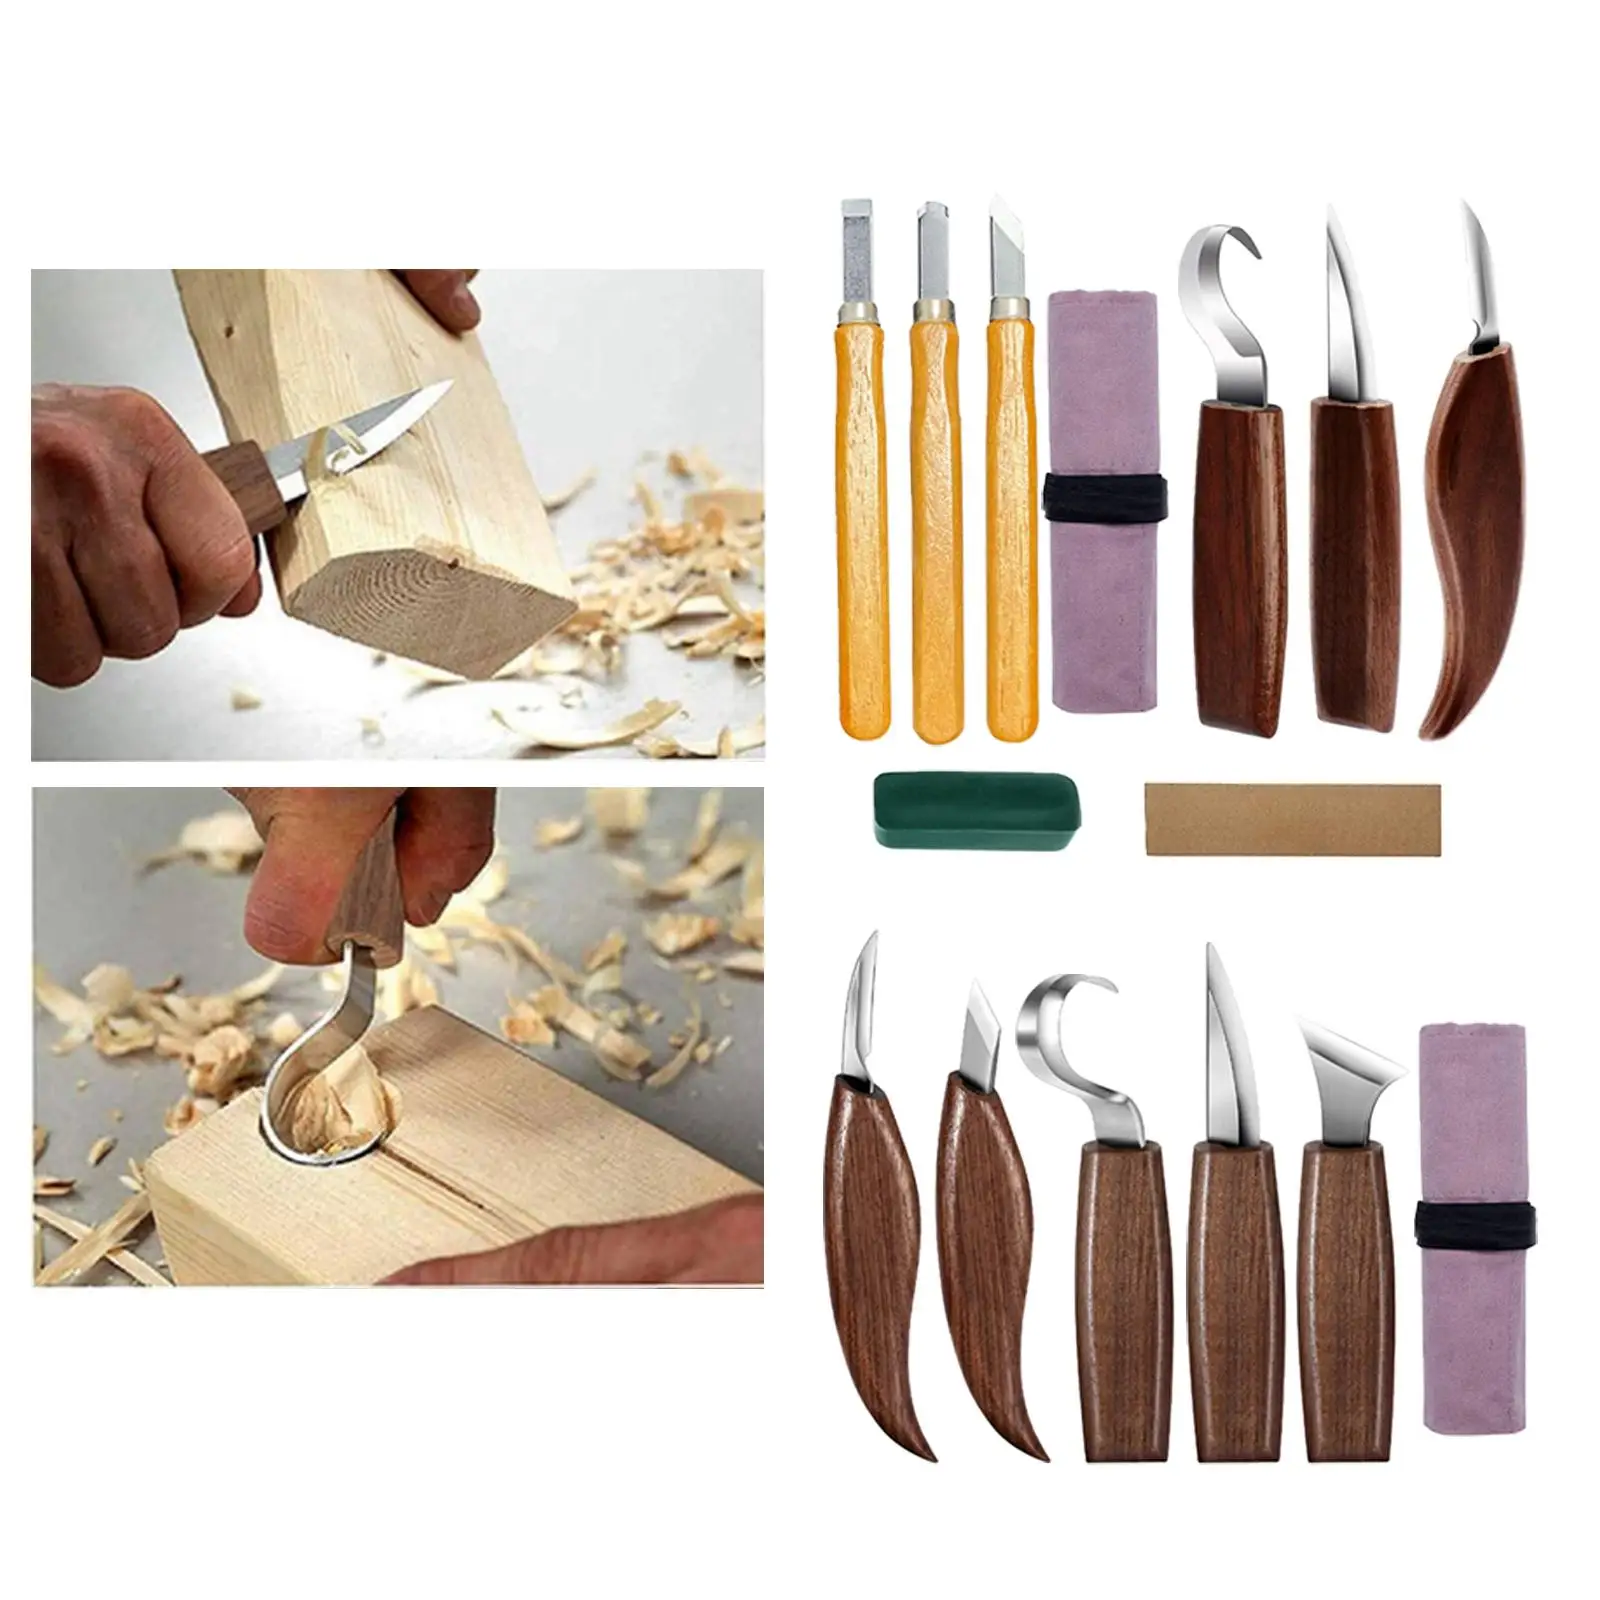 Premium Wood Carving Tools Set Woodworking Cutter Hook Carving Knife Hand Tool Detail Cutter DIY Beginners Kids Carpentry Adults